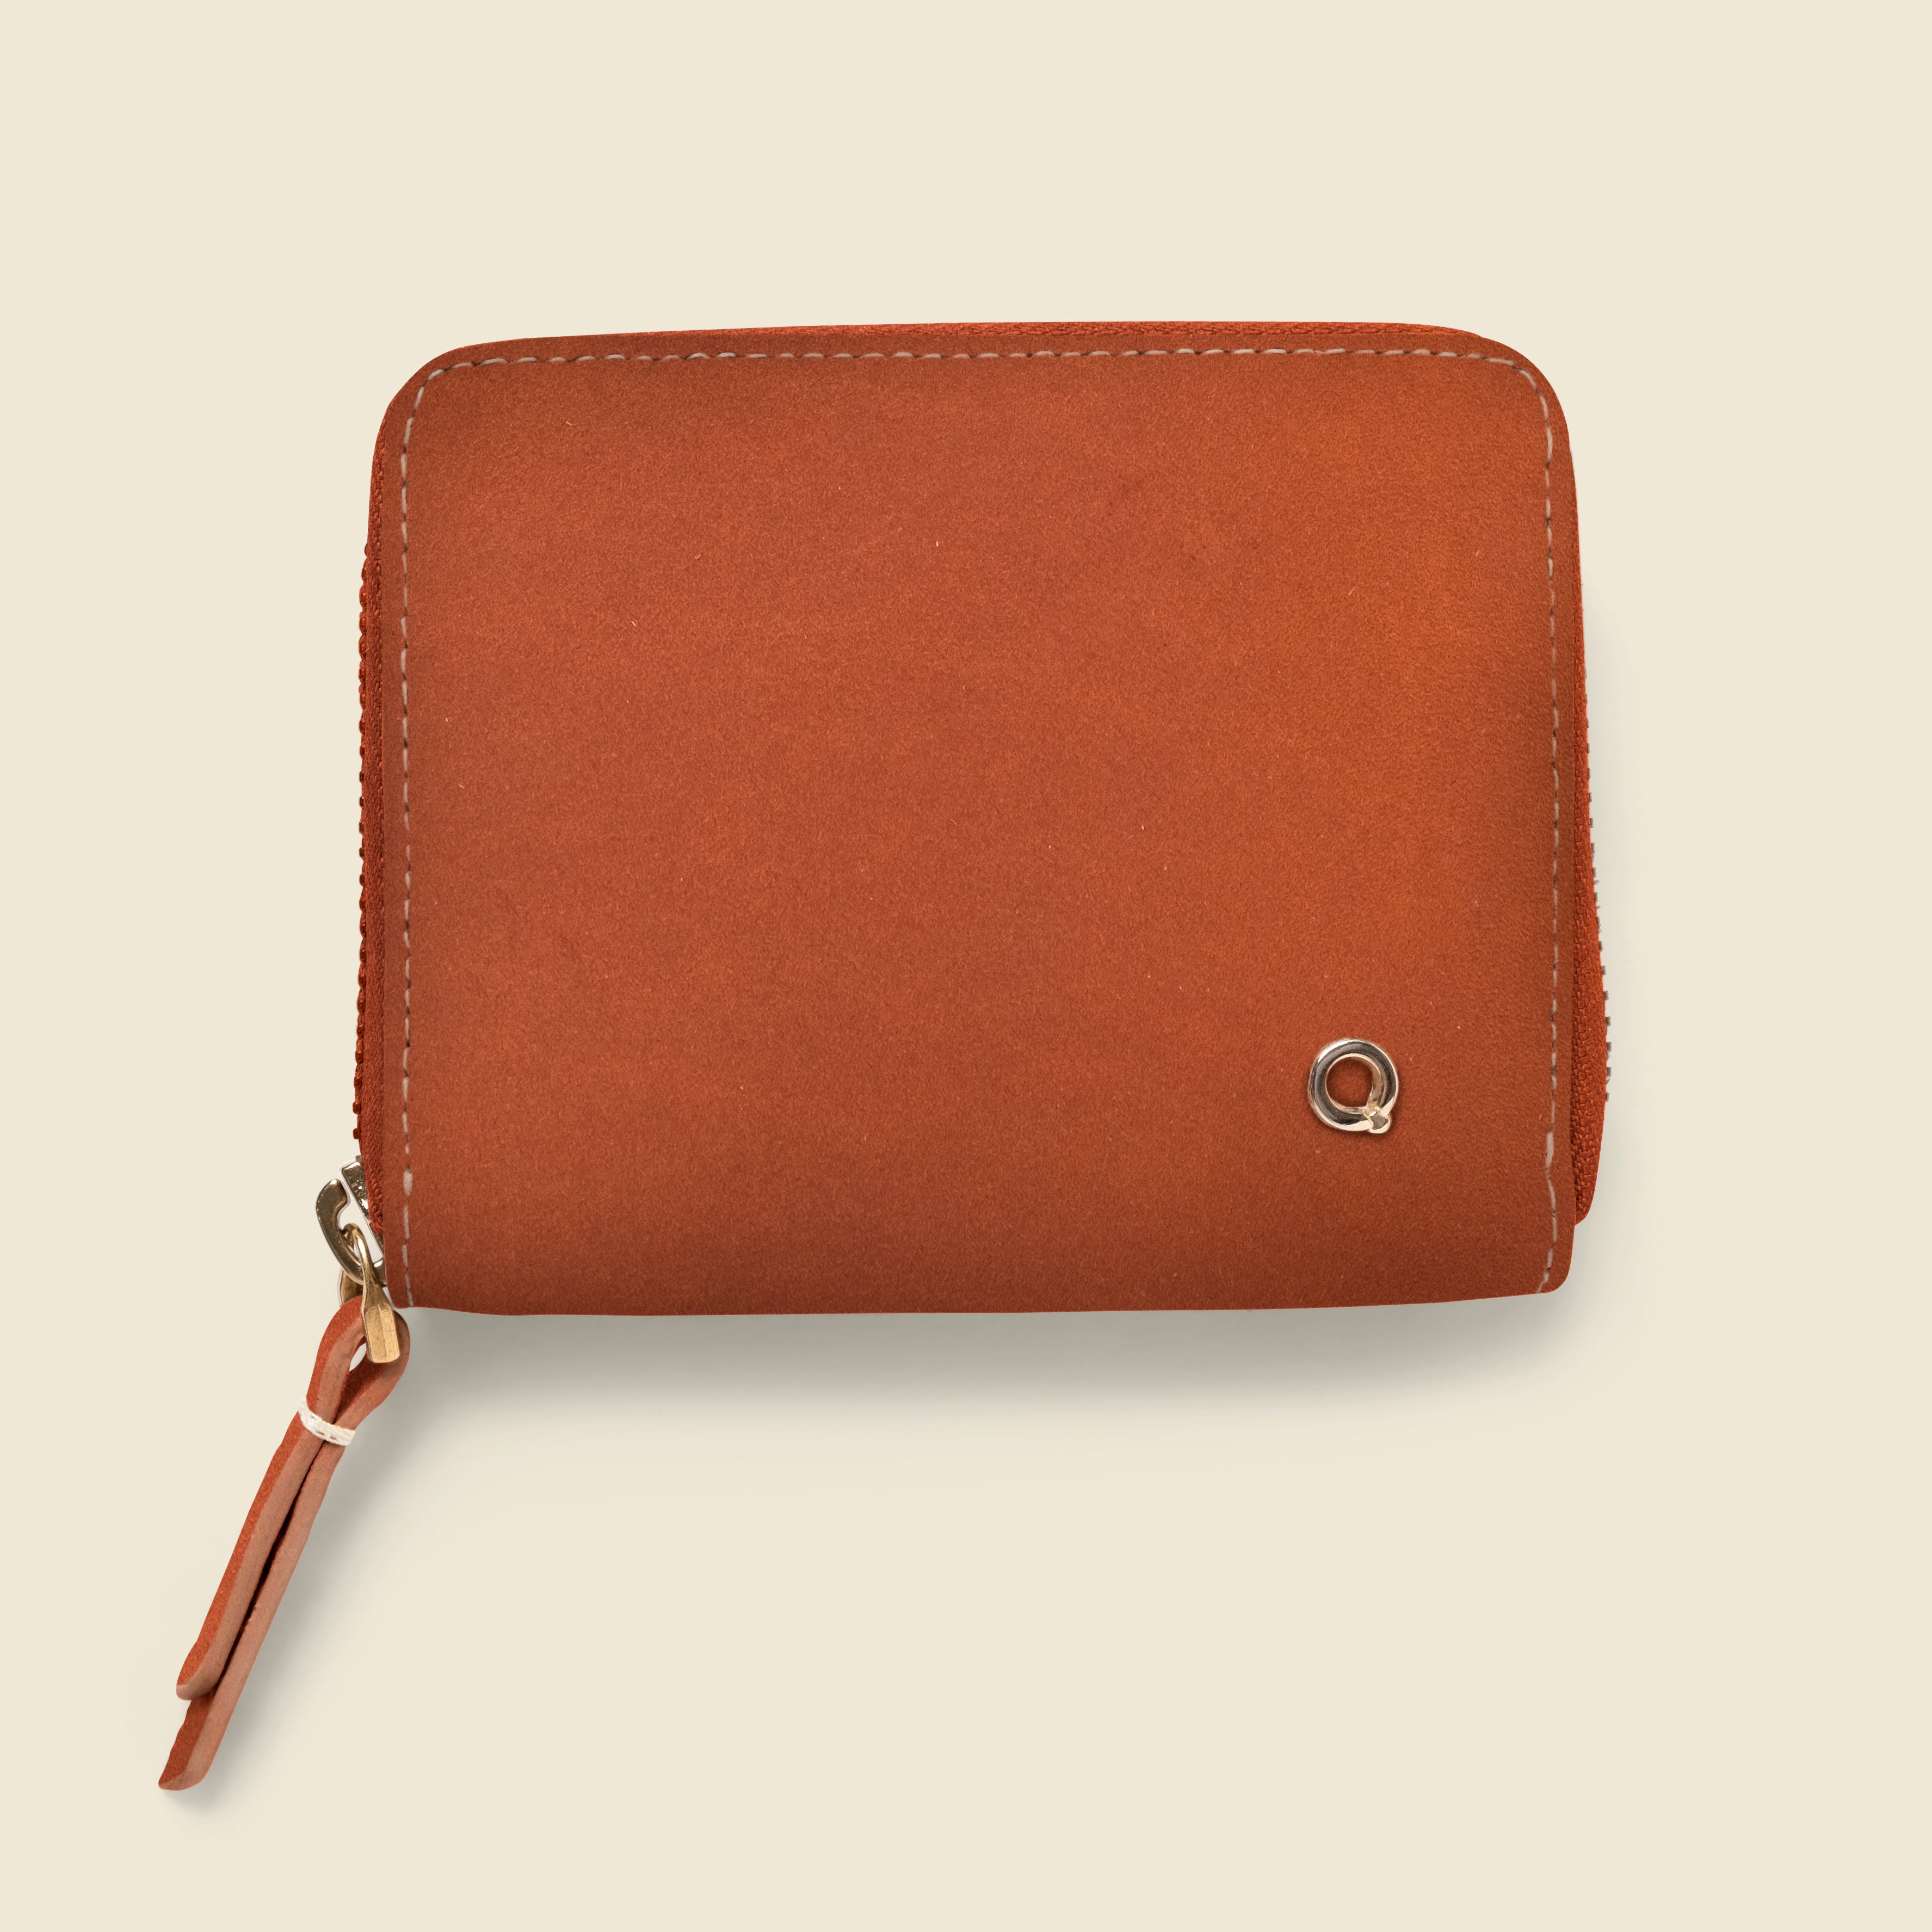 tan zipper wallet for women - corporate gifts and private label